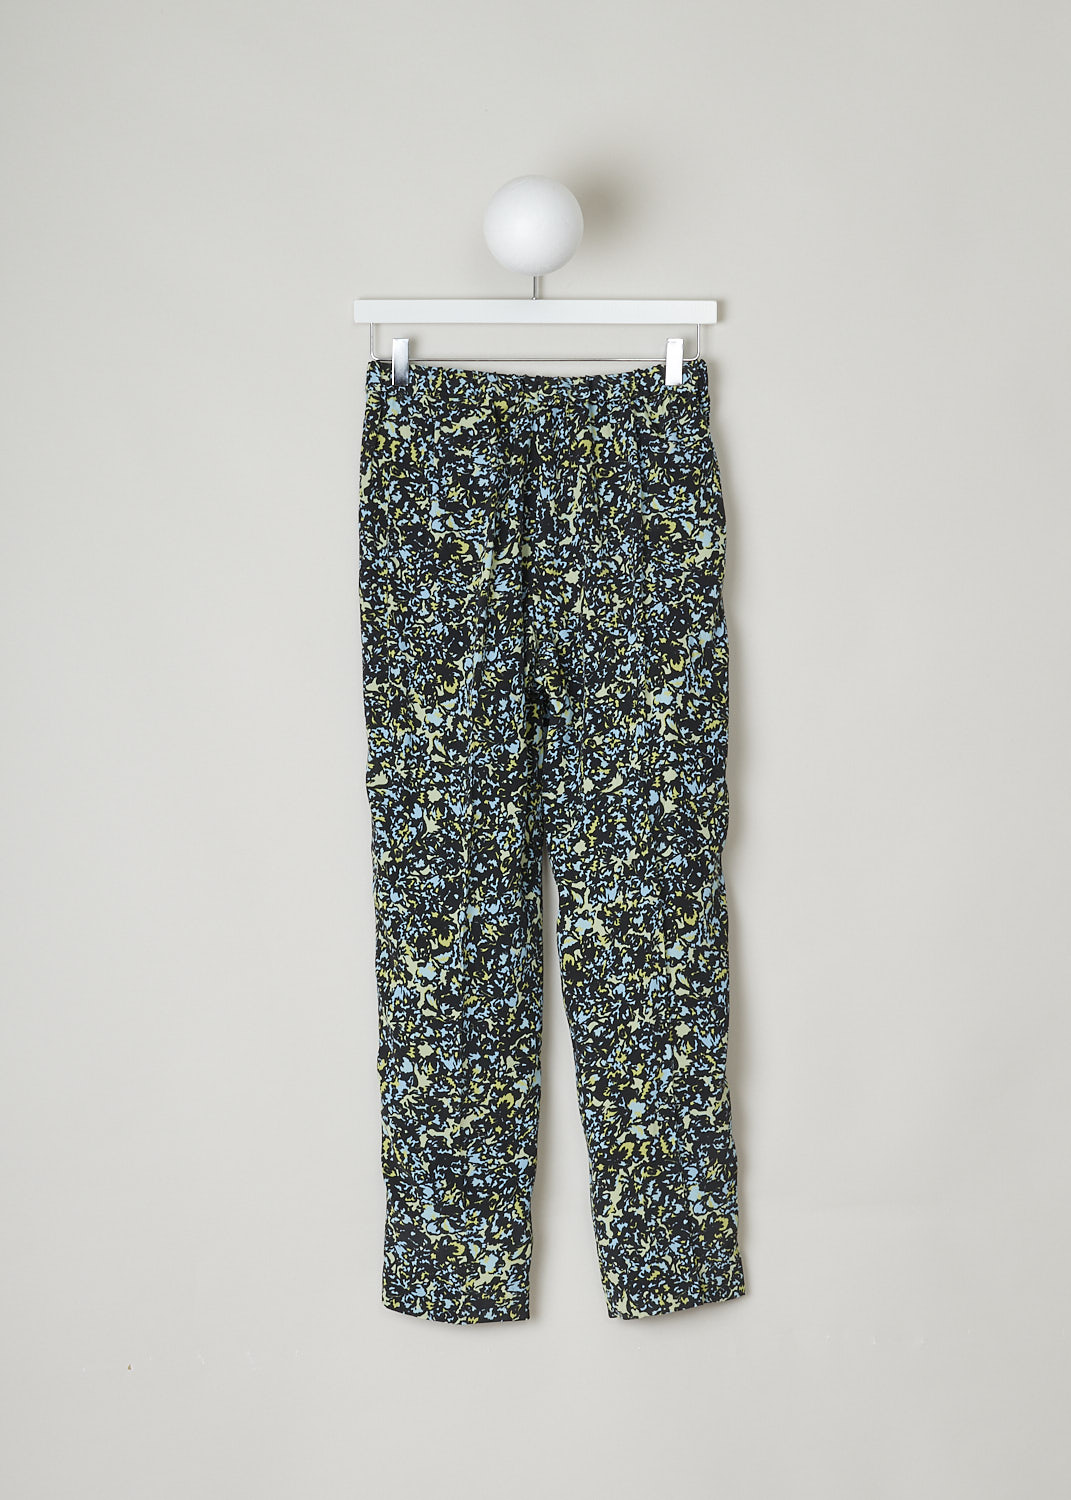 DRIES VAN NOTEN, PANTS WITH GREEN AND BLUE ABSTRACT PRINT, PALMIRA_6175_WW_PANTS_BLUE, Black, Green, Blue, Back, These pants have a black base with a green and blue abstract print. These slip-on pants have an elasticated waistband with a drawstring on the inside. This model has slanted pockets. The tapered legs have a centre crease front and back.
